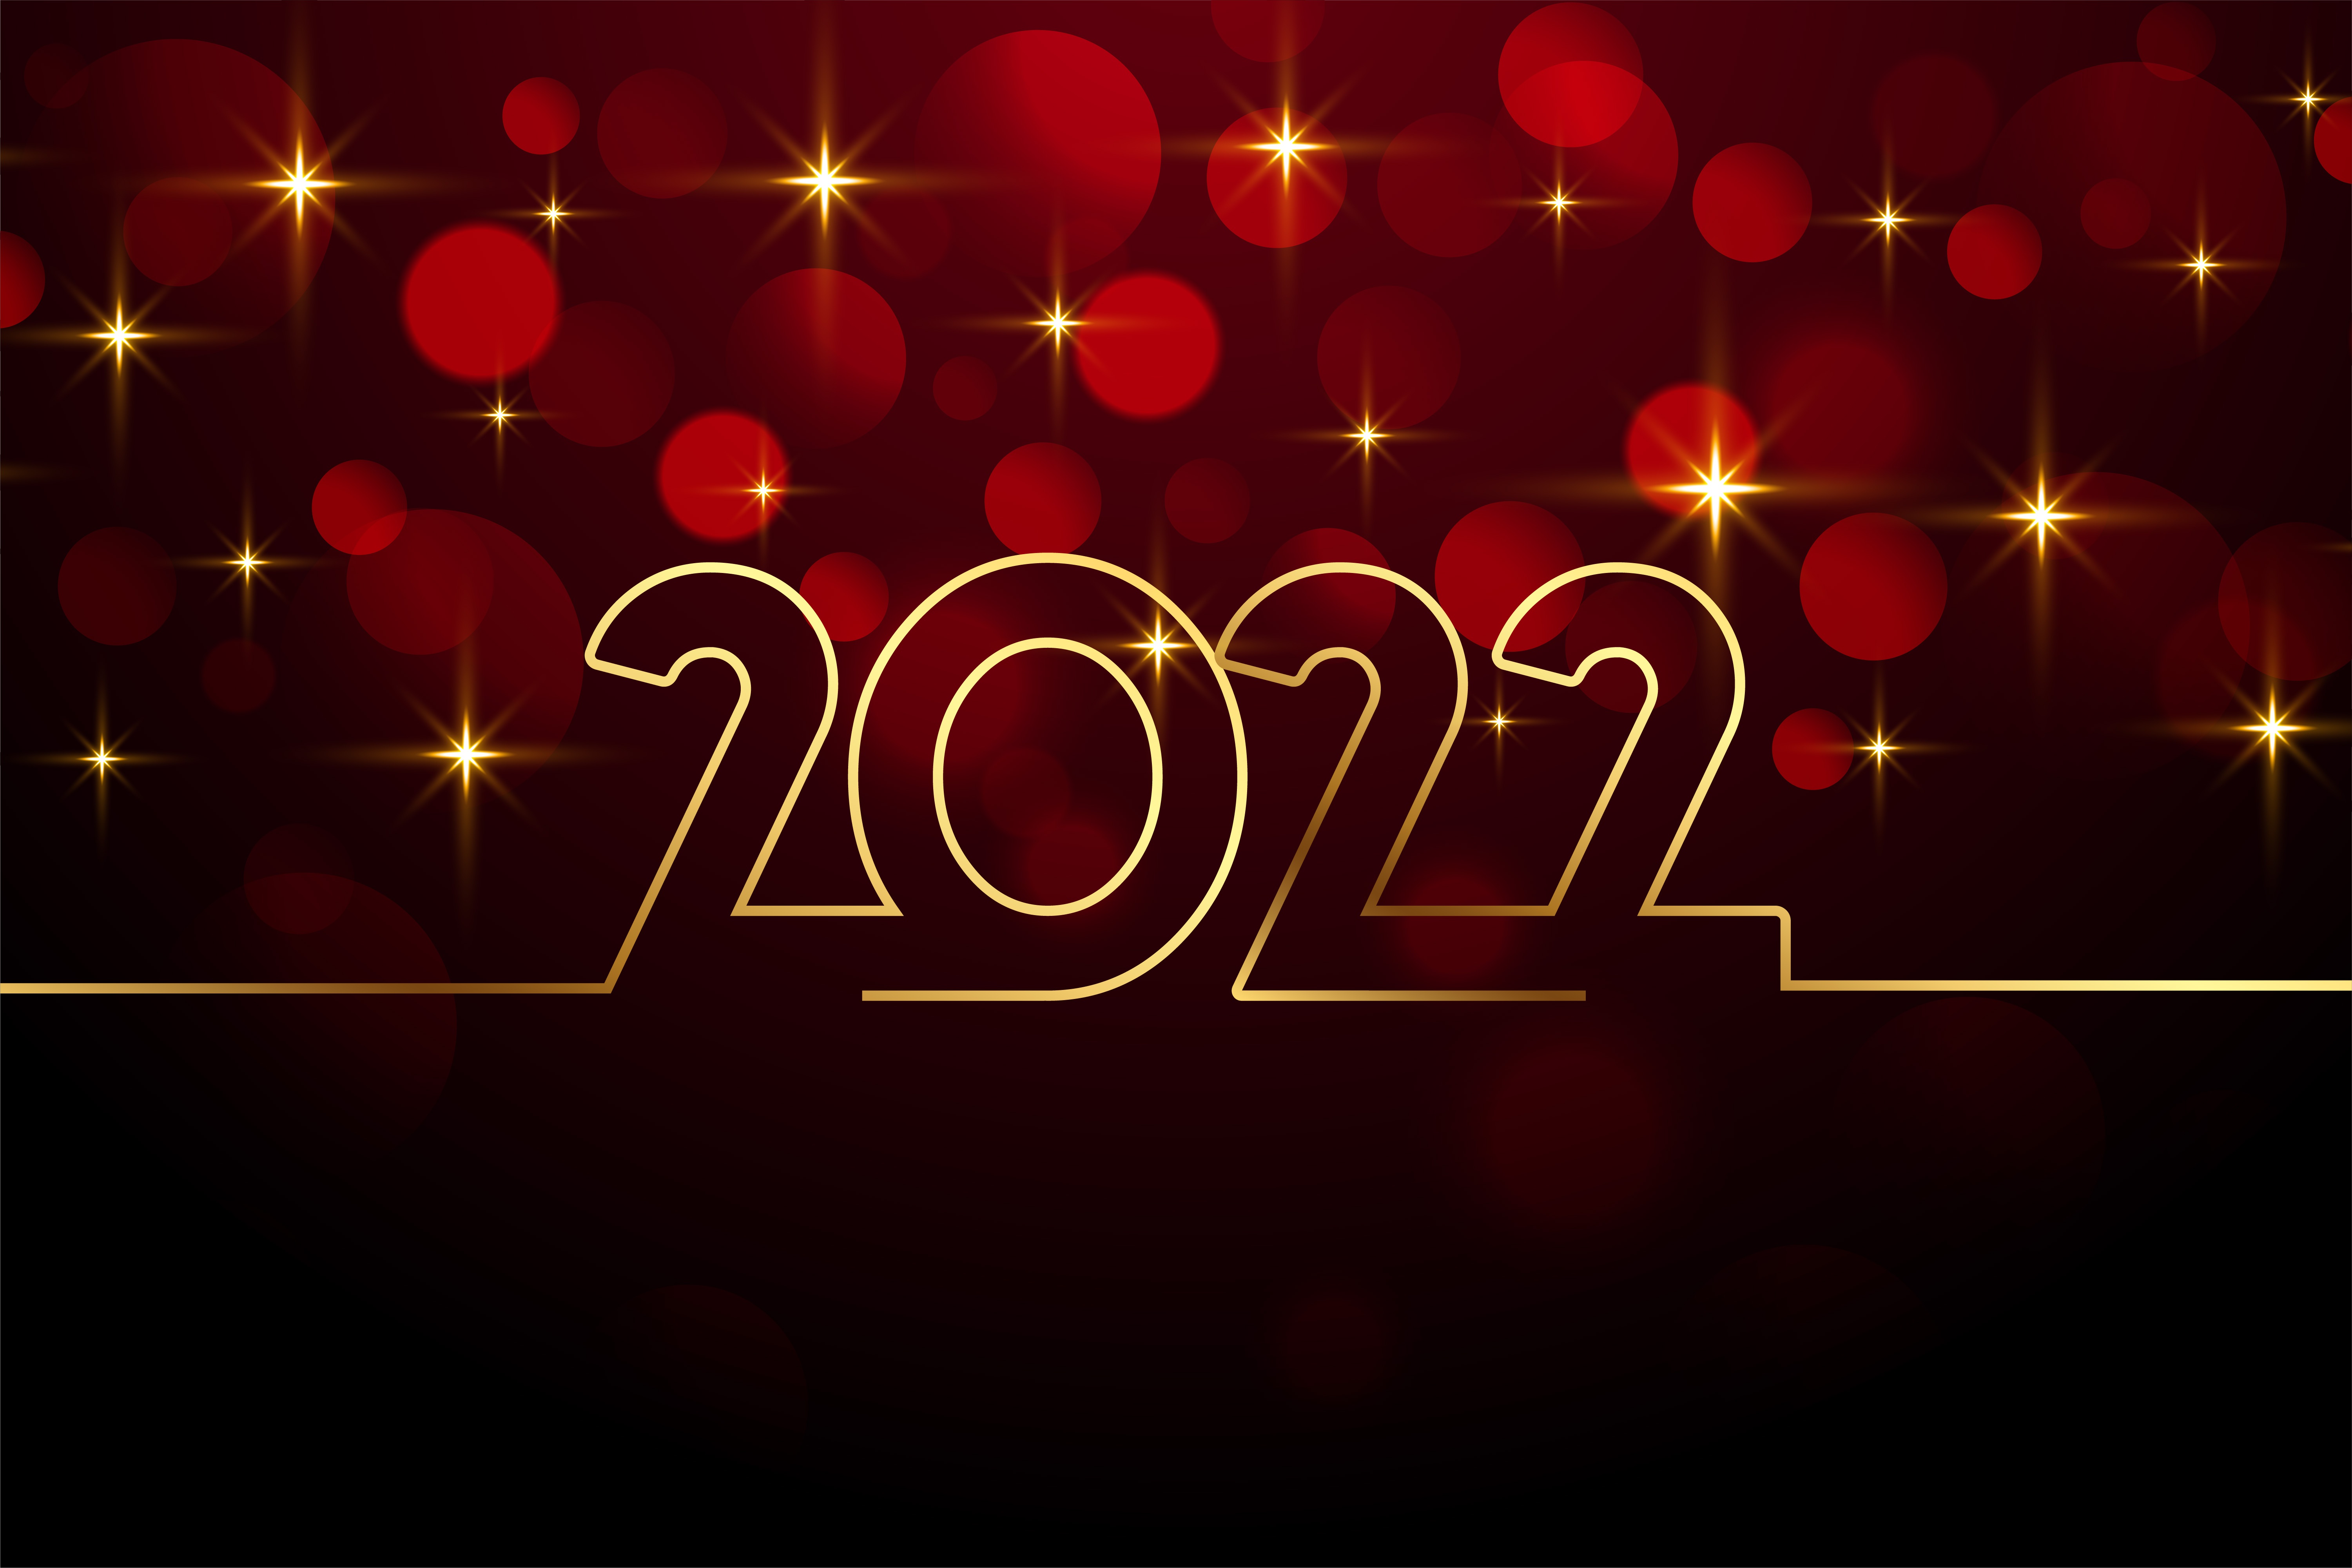 Holiday New Year 2022 6001x4001